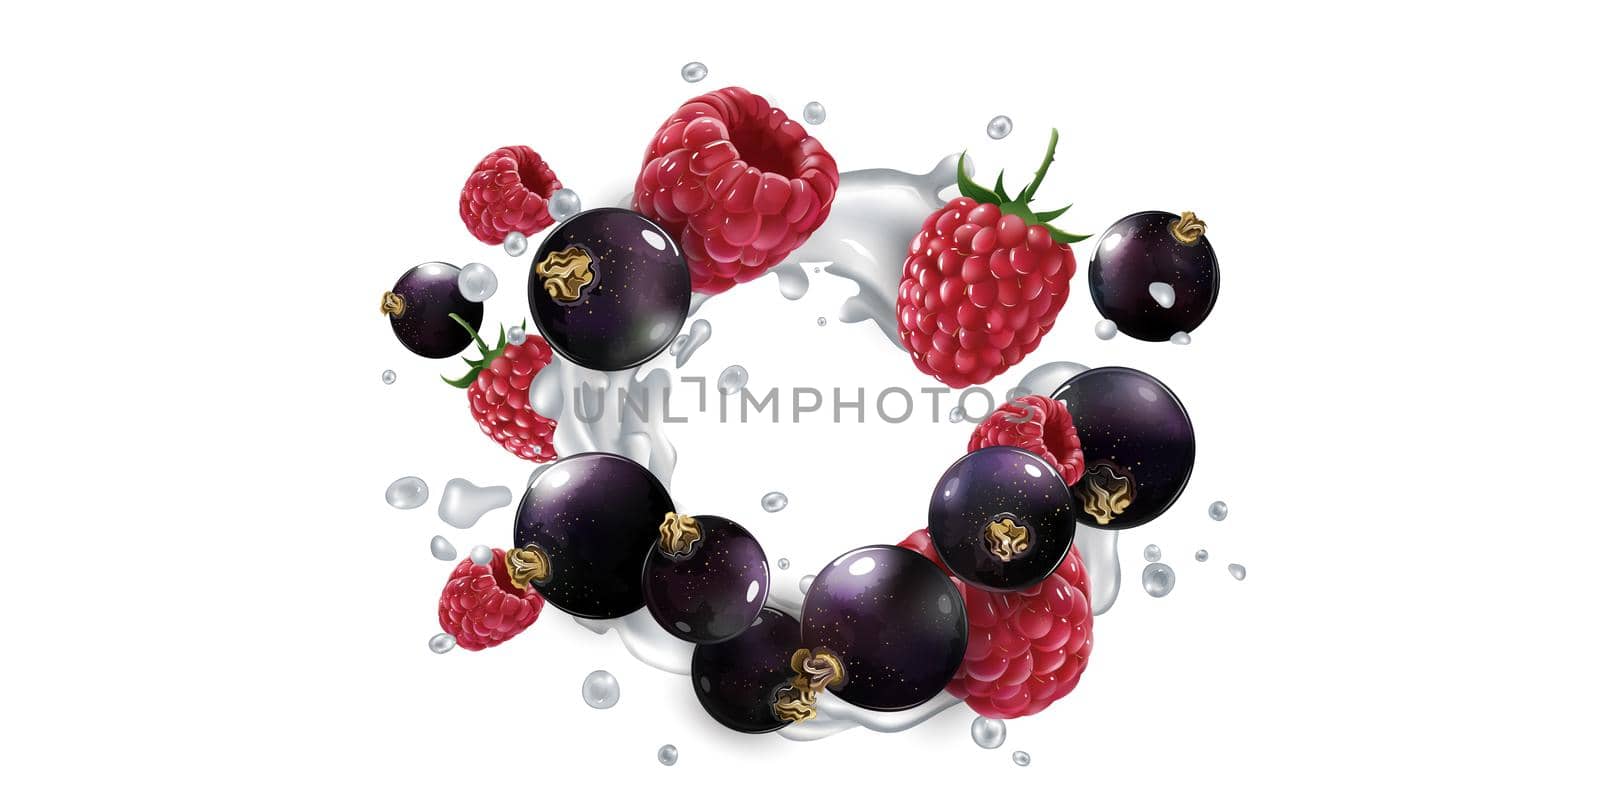 Fresh black currants and raspberries in milk splashes on a white background. Realistic style illustration.